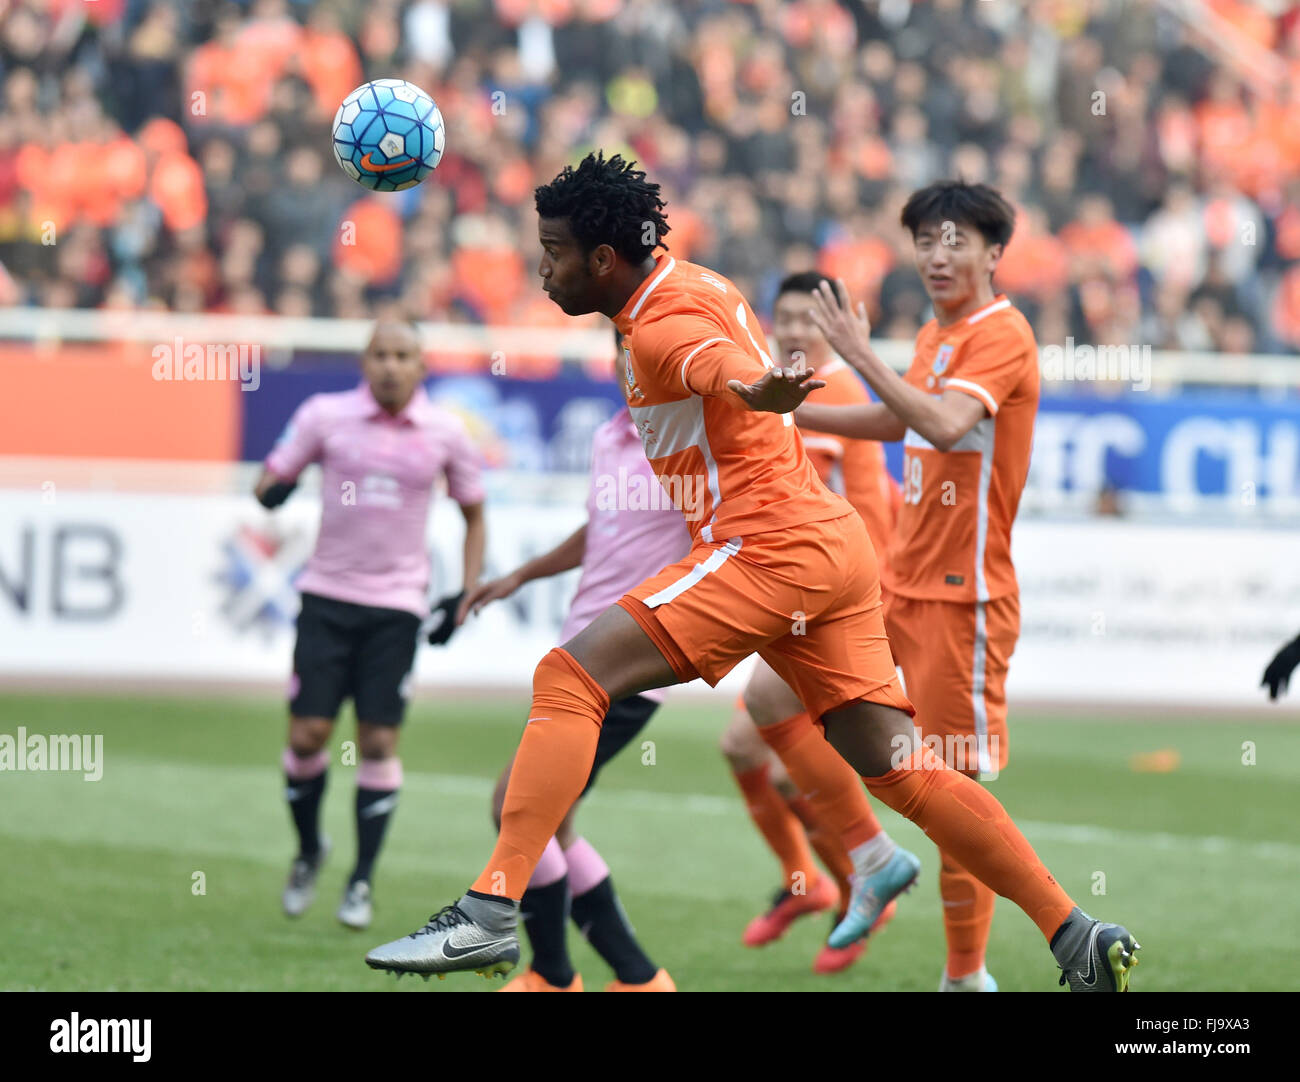 Jinan, China's Shandong Province. 1st Mar, 2016. Carlos Gilberto Silva (front) of China's Shandong Luneng FC heads the ball during the group F match against Thailand's Buriram United at the AFC Champions League 2016 in Ji'nan, east China's Shandong Province, on March 1, 2016. Shandong Luneng FC won 3-0. Credit:  Xu Suhui/Xinhua/Alamy Live News Stock Photo